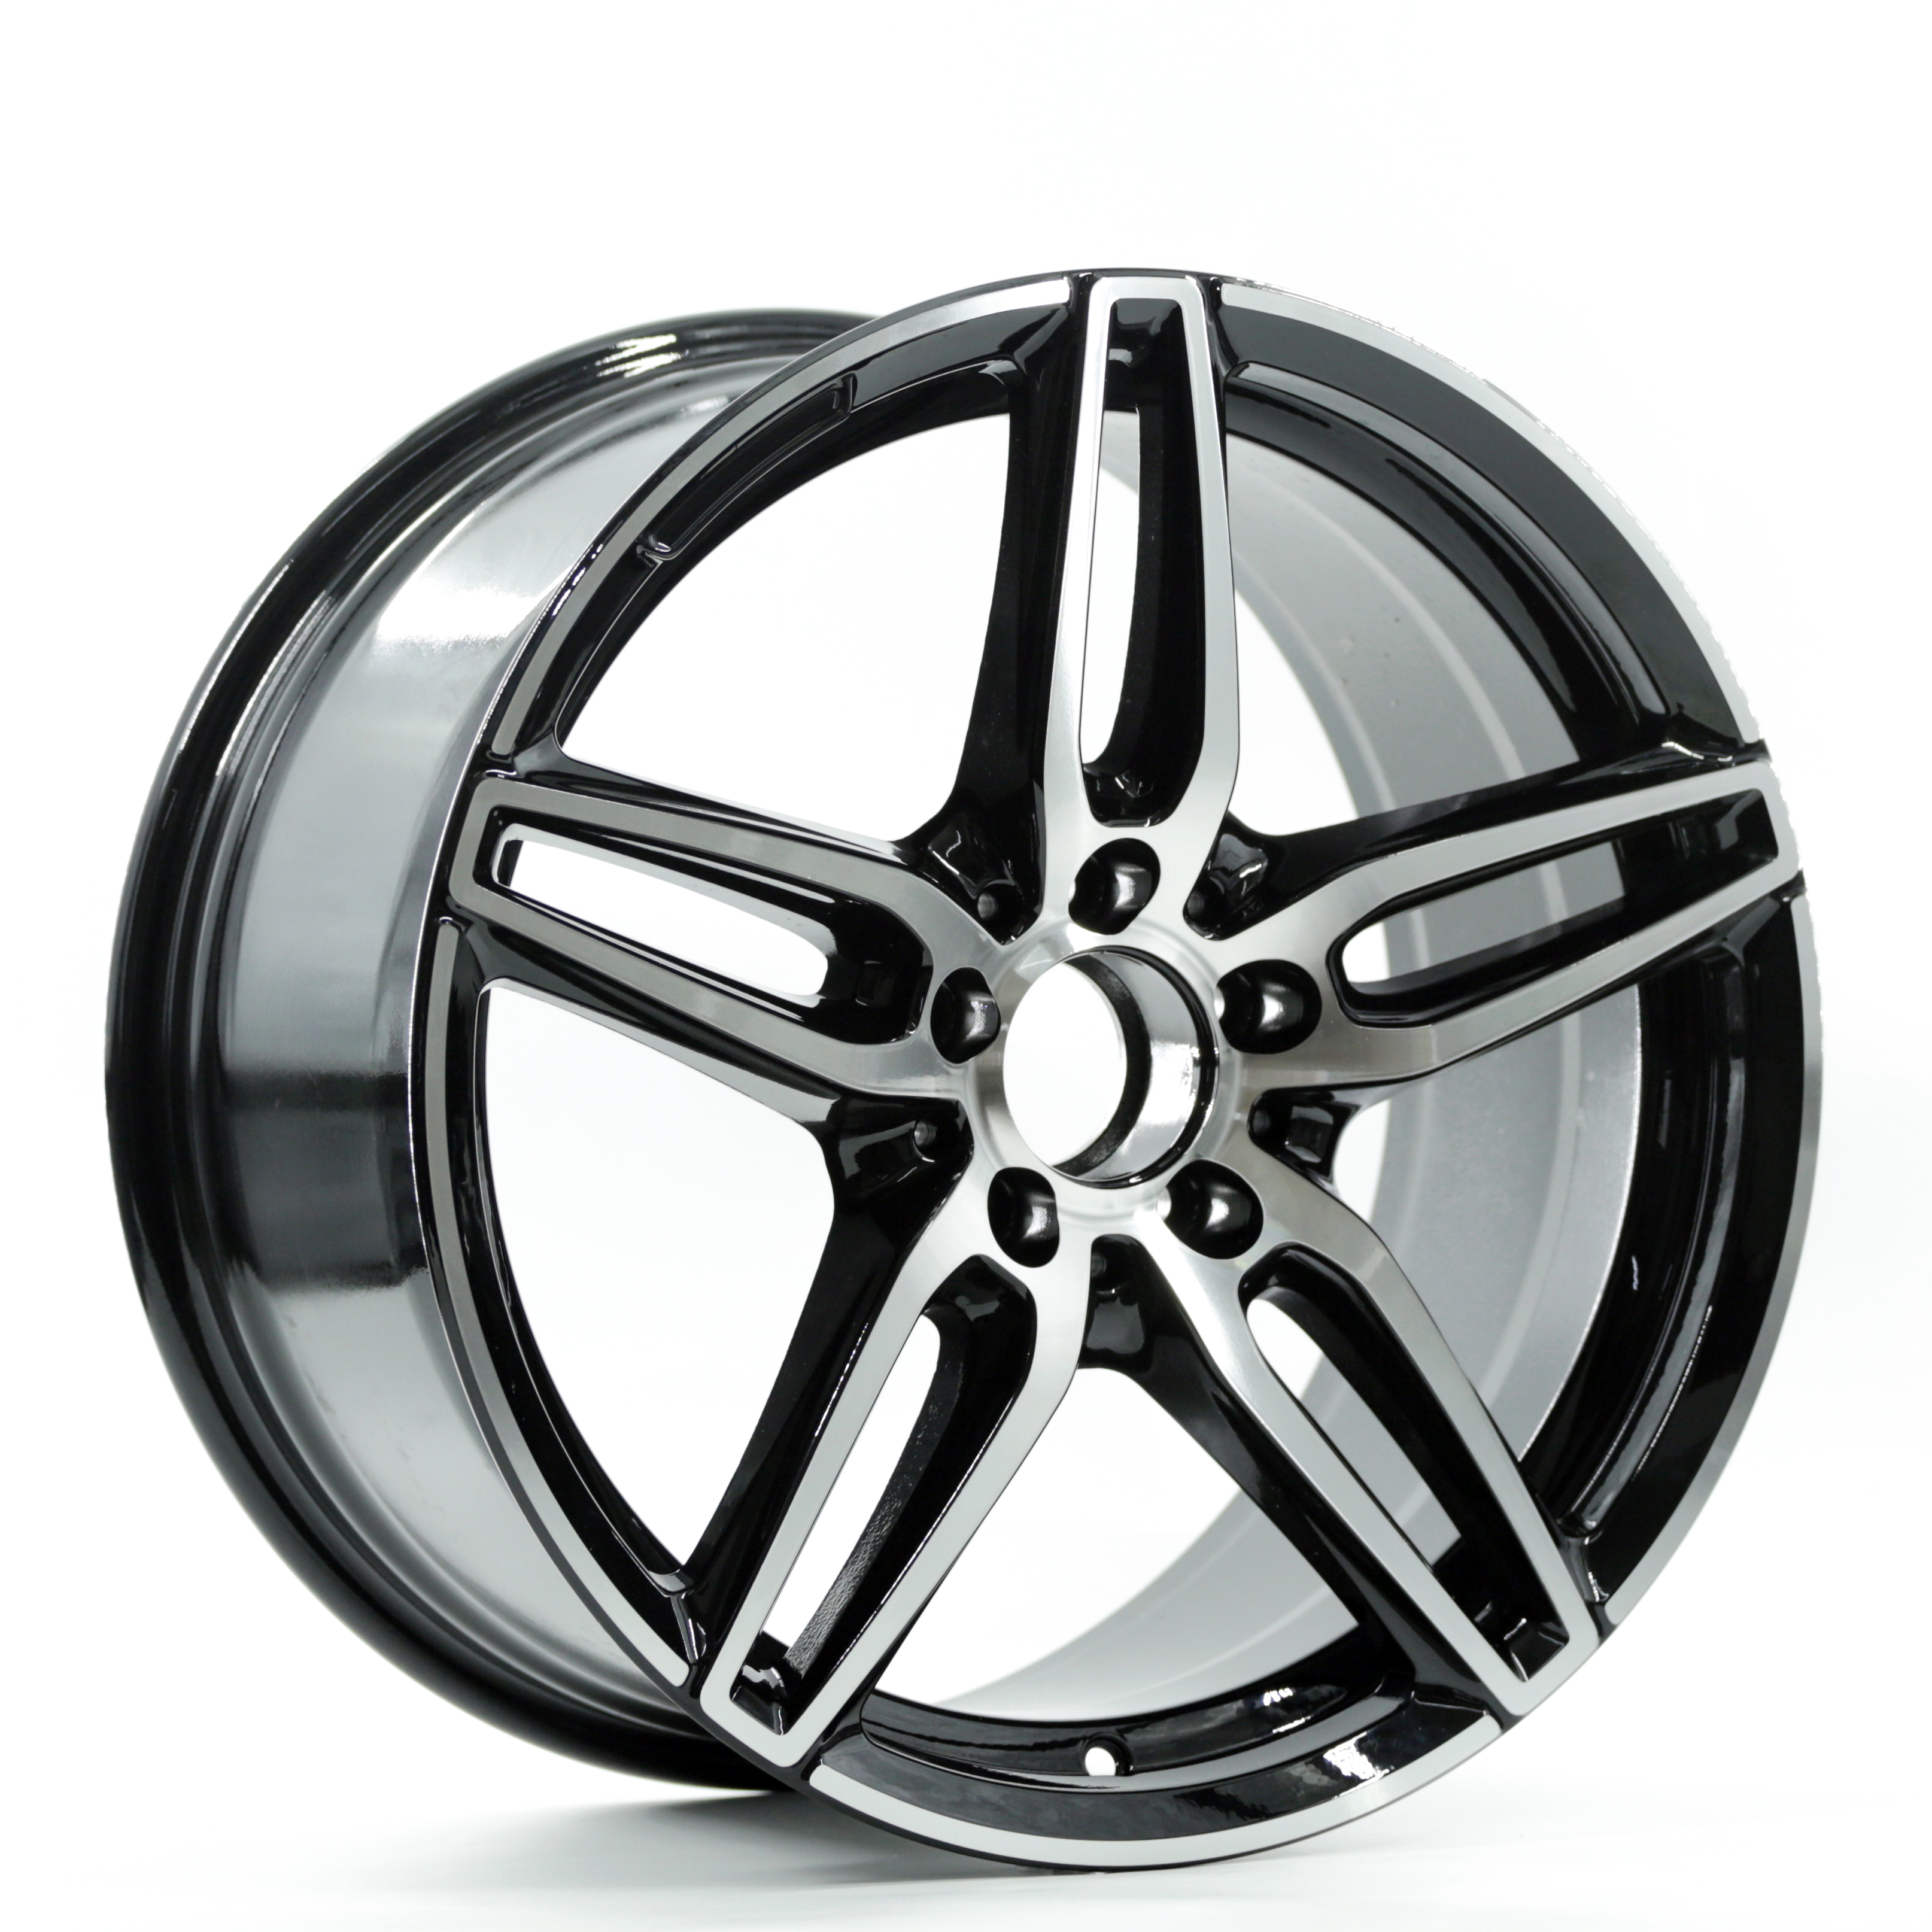 Rayone A036 China Wheels Factory Wholesale 18/19inch Car Alloy Wheels For Mercedes Benz